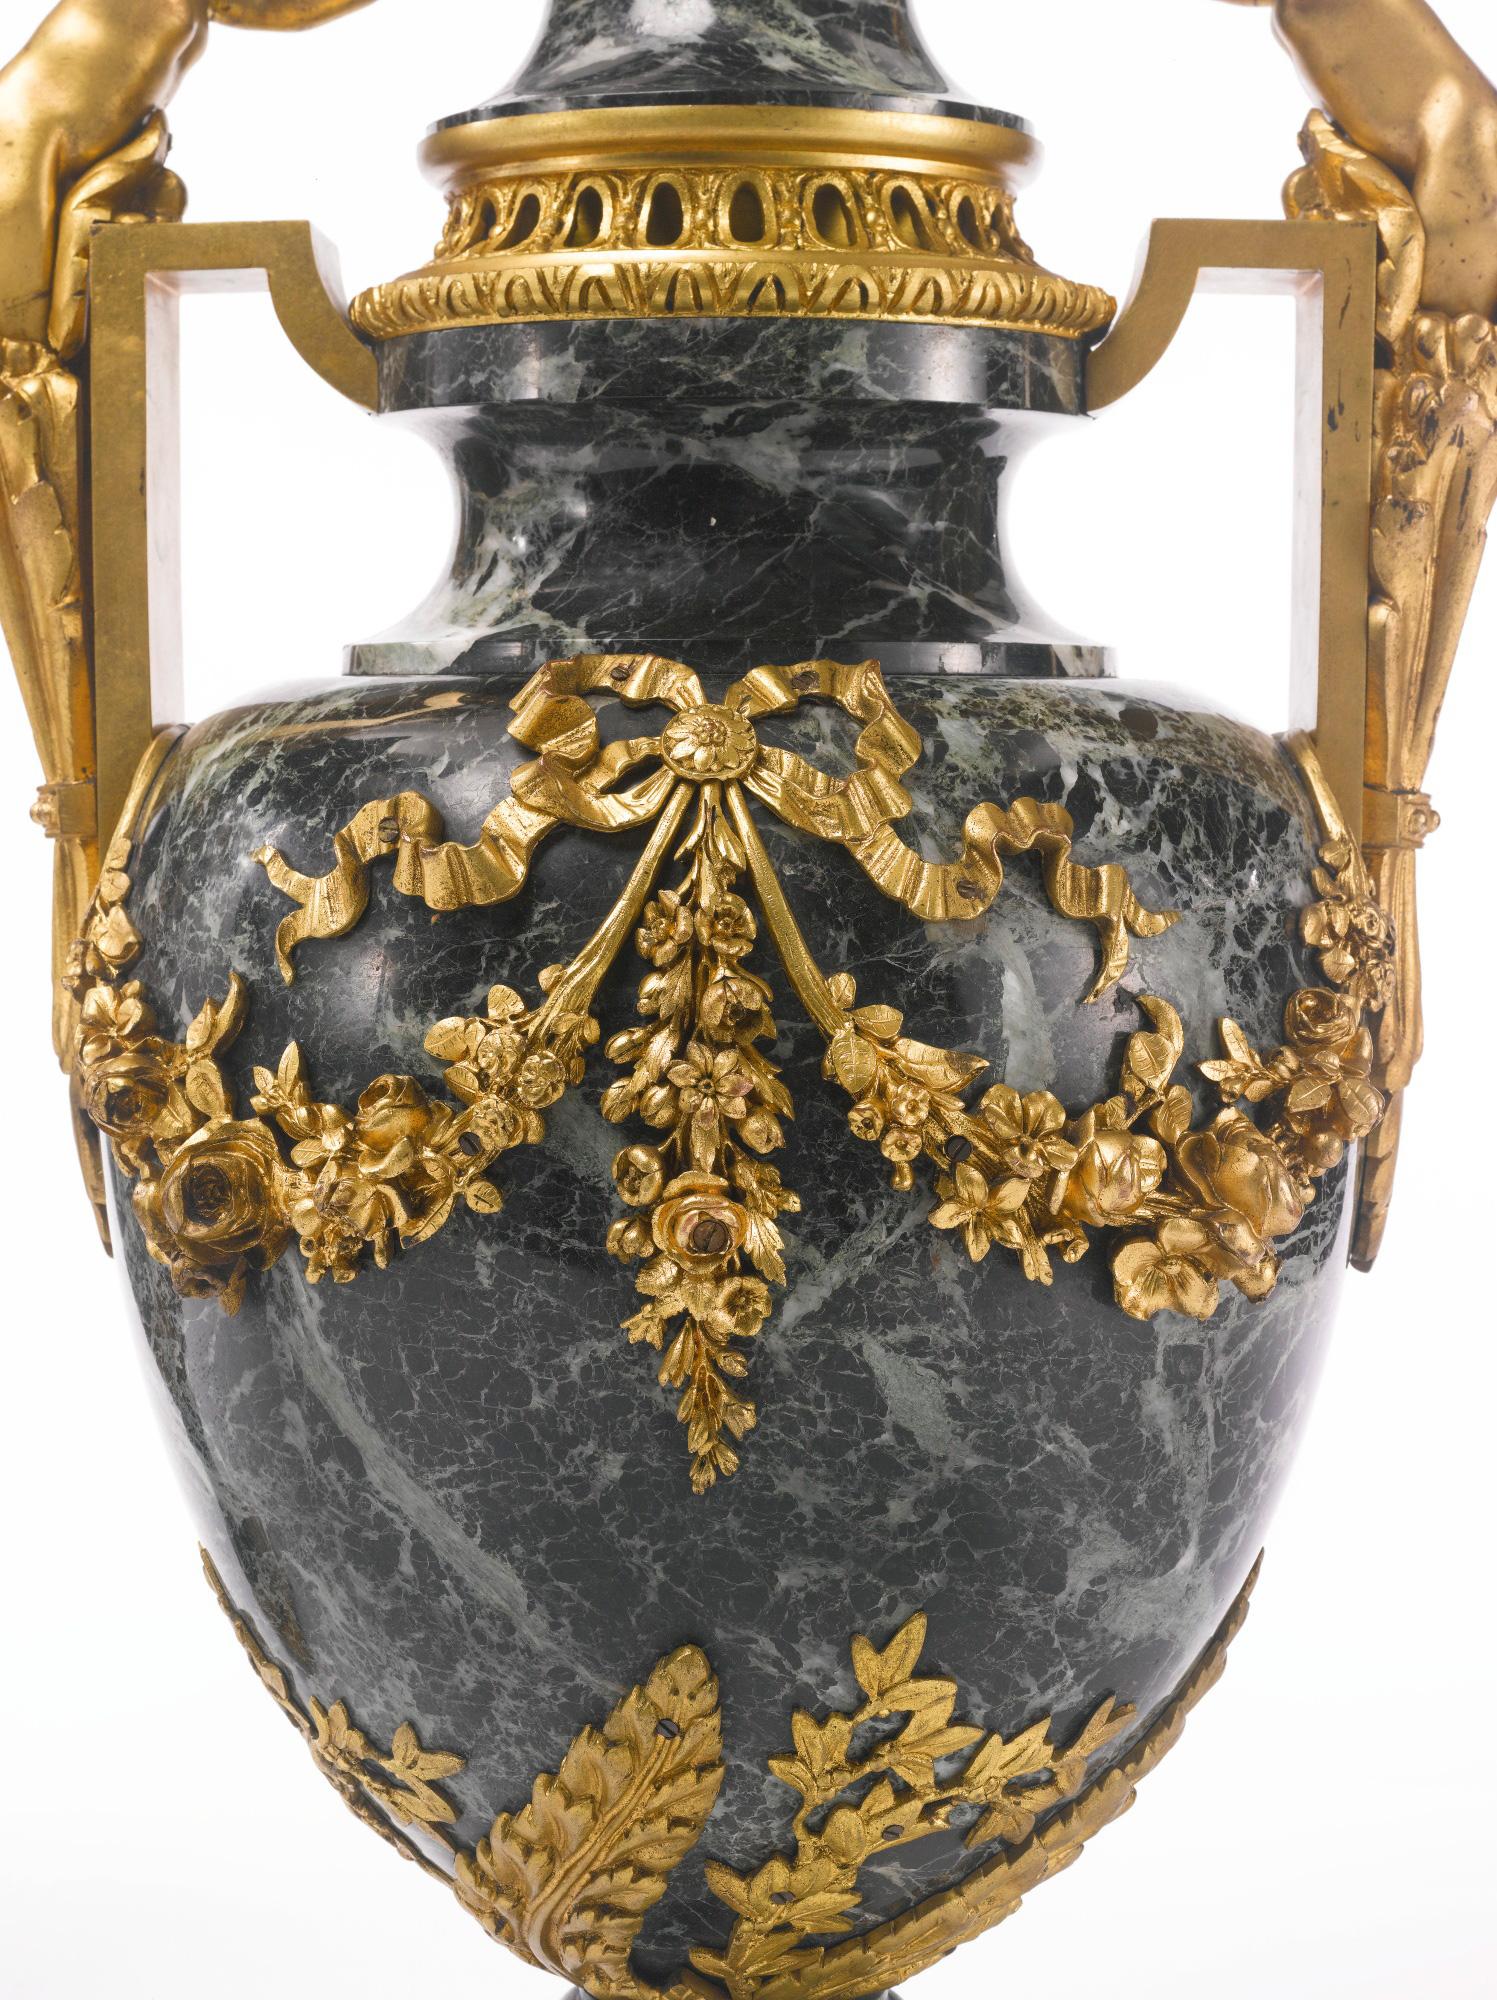 A large pair of Late 19th century Louis XVI style gilt-bronze mounted Patricia green marble urns

Origin: France 
Date: late 19th century
Size: height 28 1/2 inches high